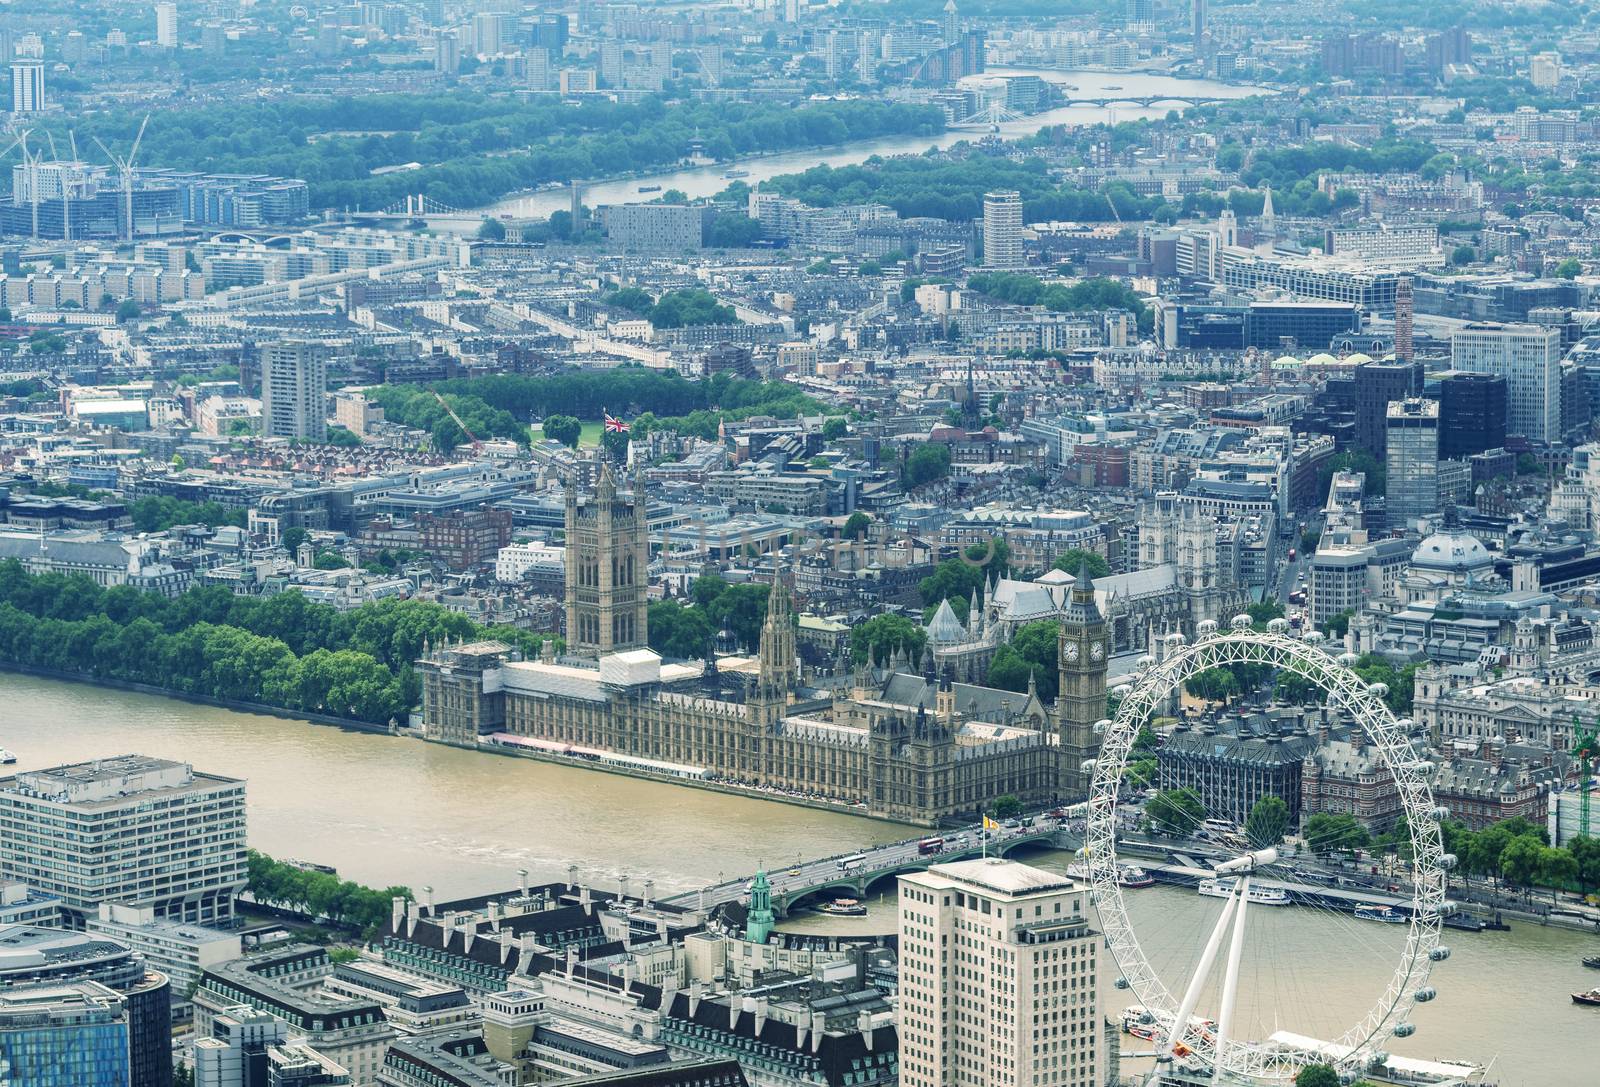 Helicopter view of Houses of Parliament and Westminster area, Lo by jovannig